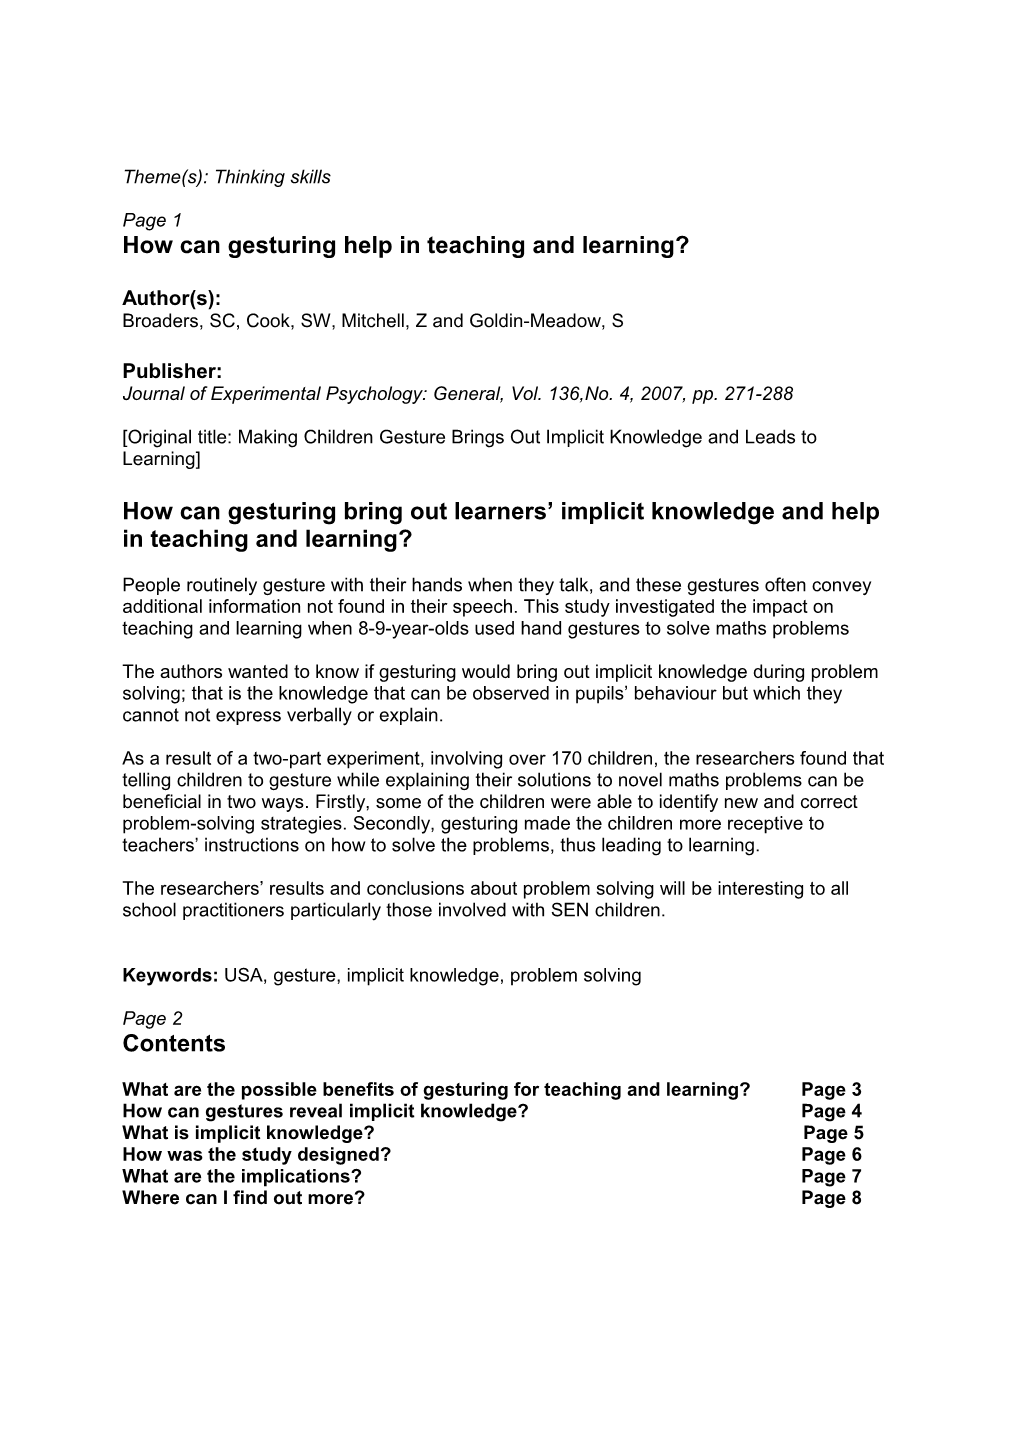 How Can Gesturing Help in Teaching and Learning?